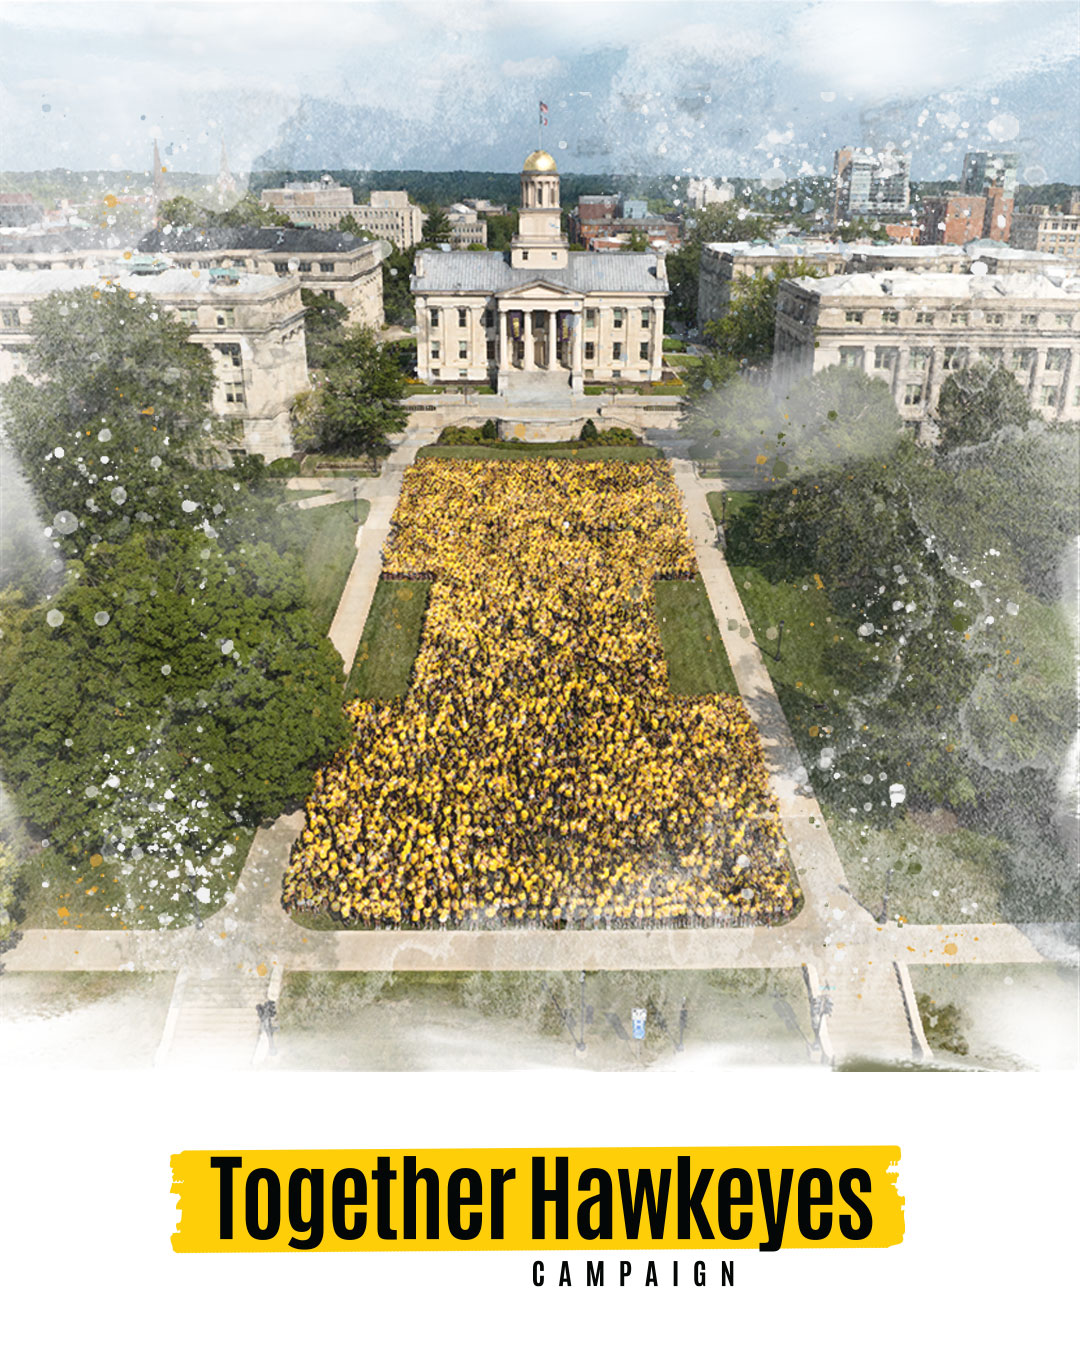 aerial photo of students in I formation in front of the old capitol